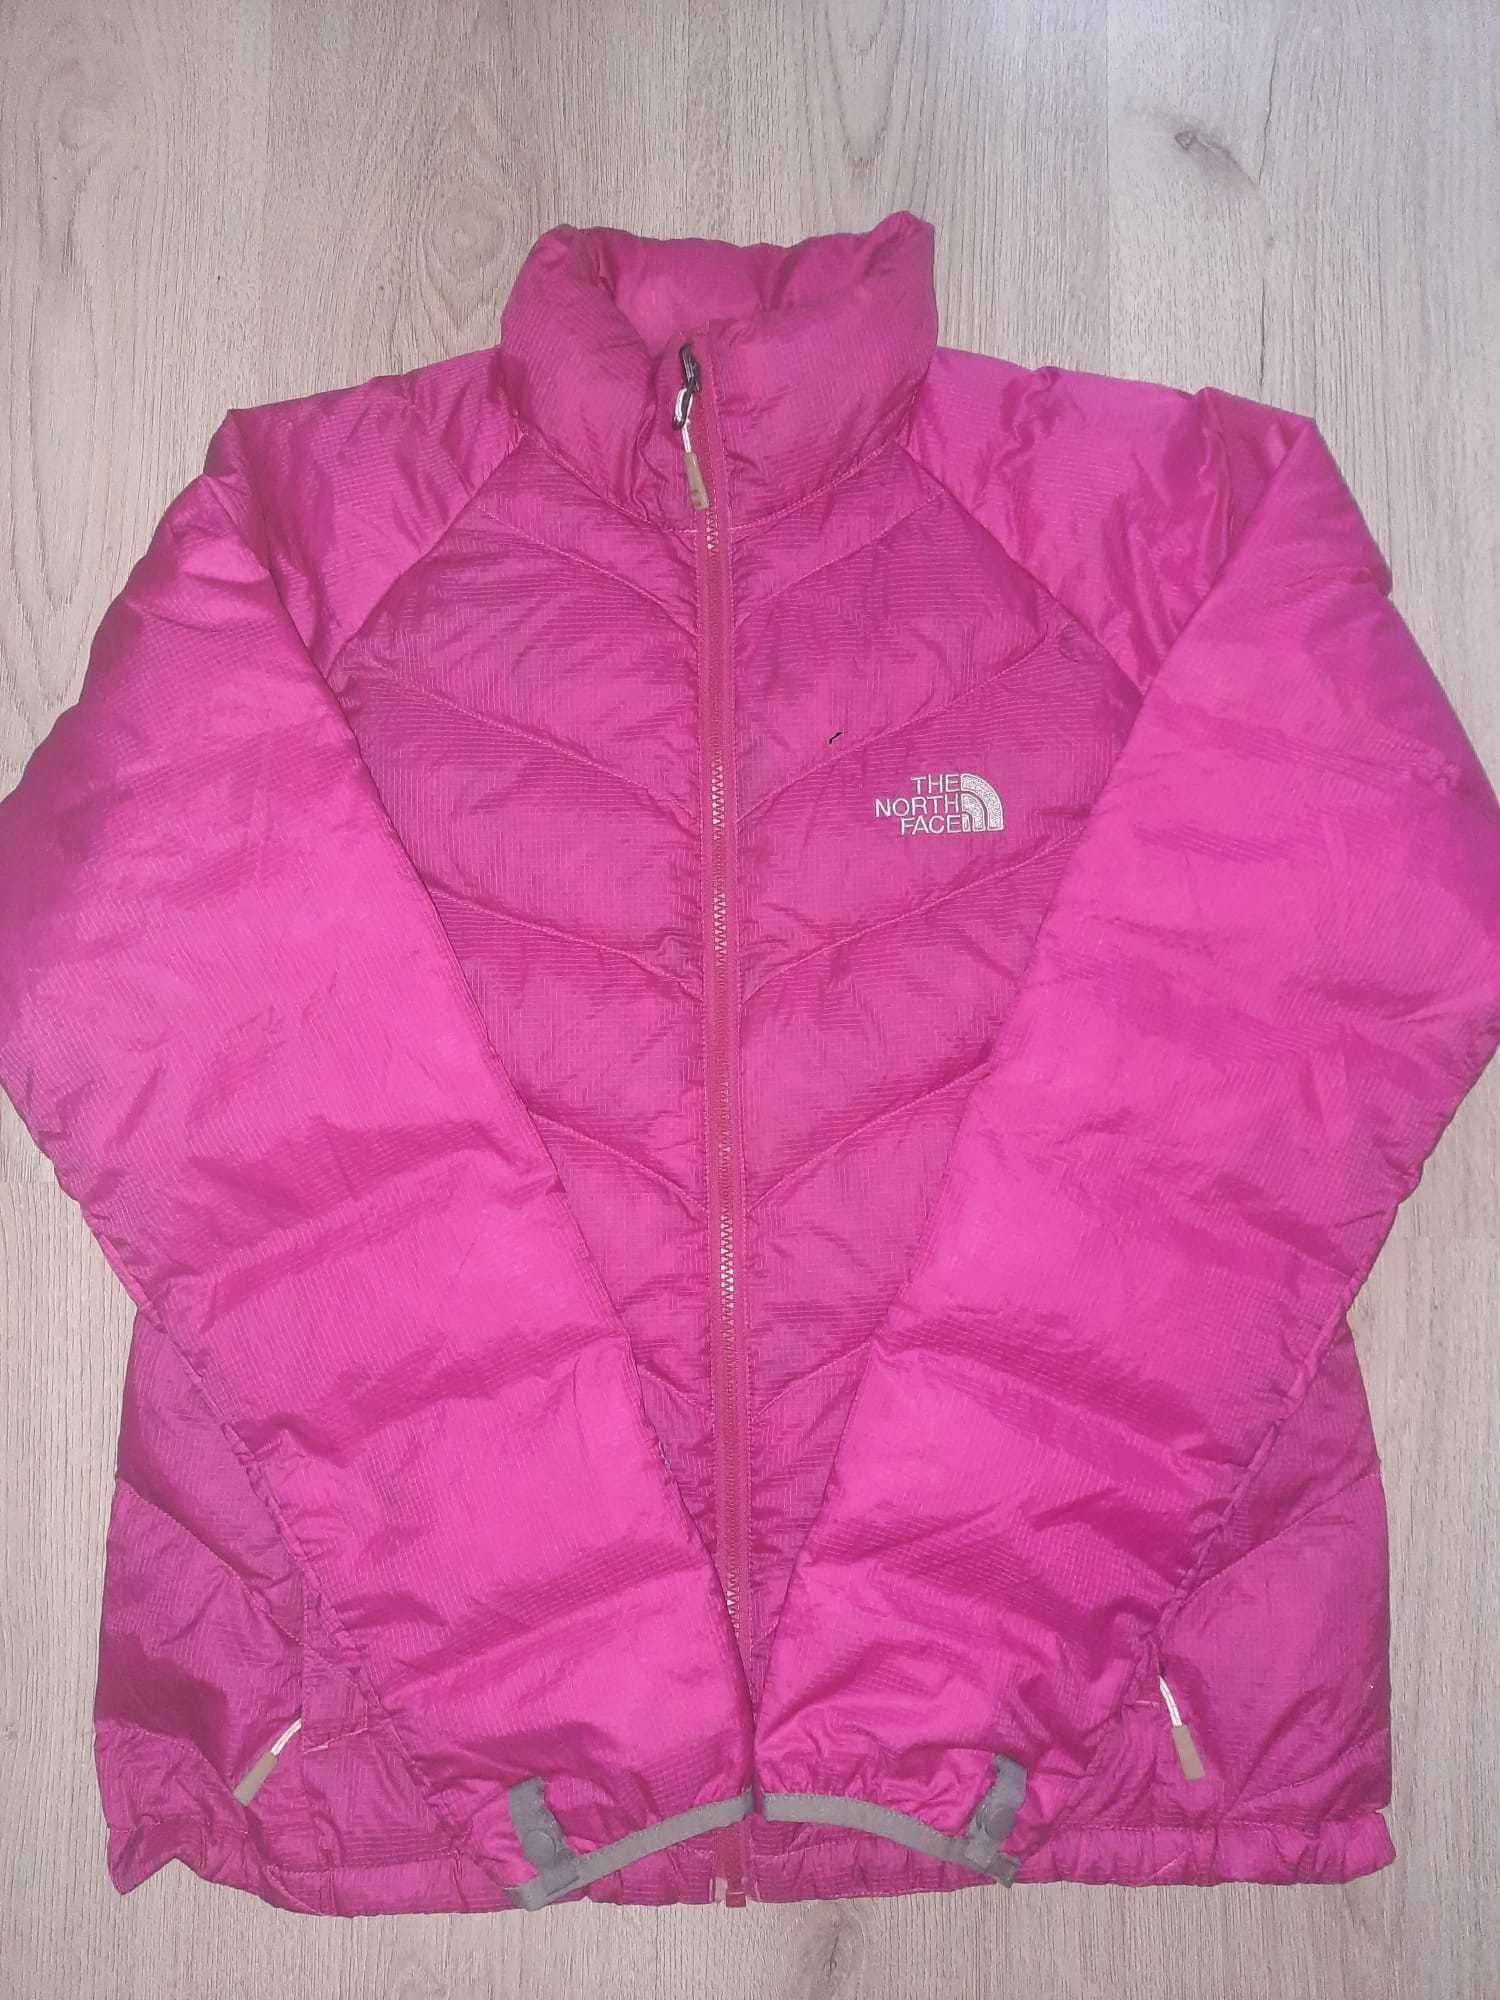 The North Face 550 размер L